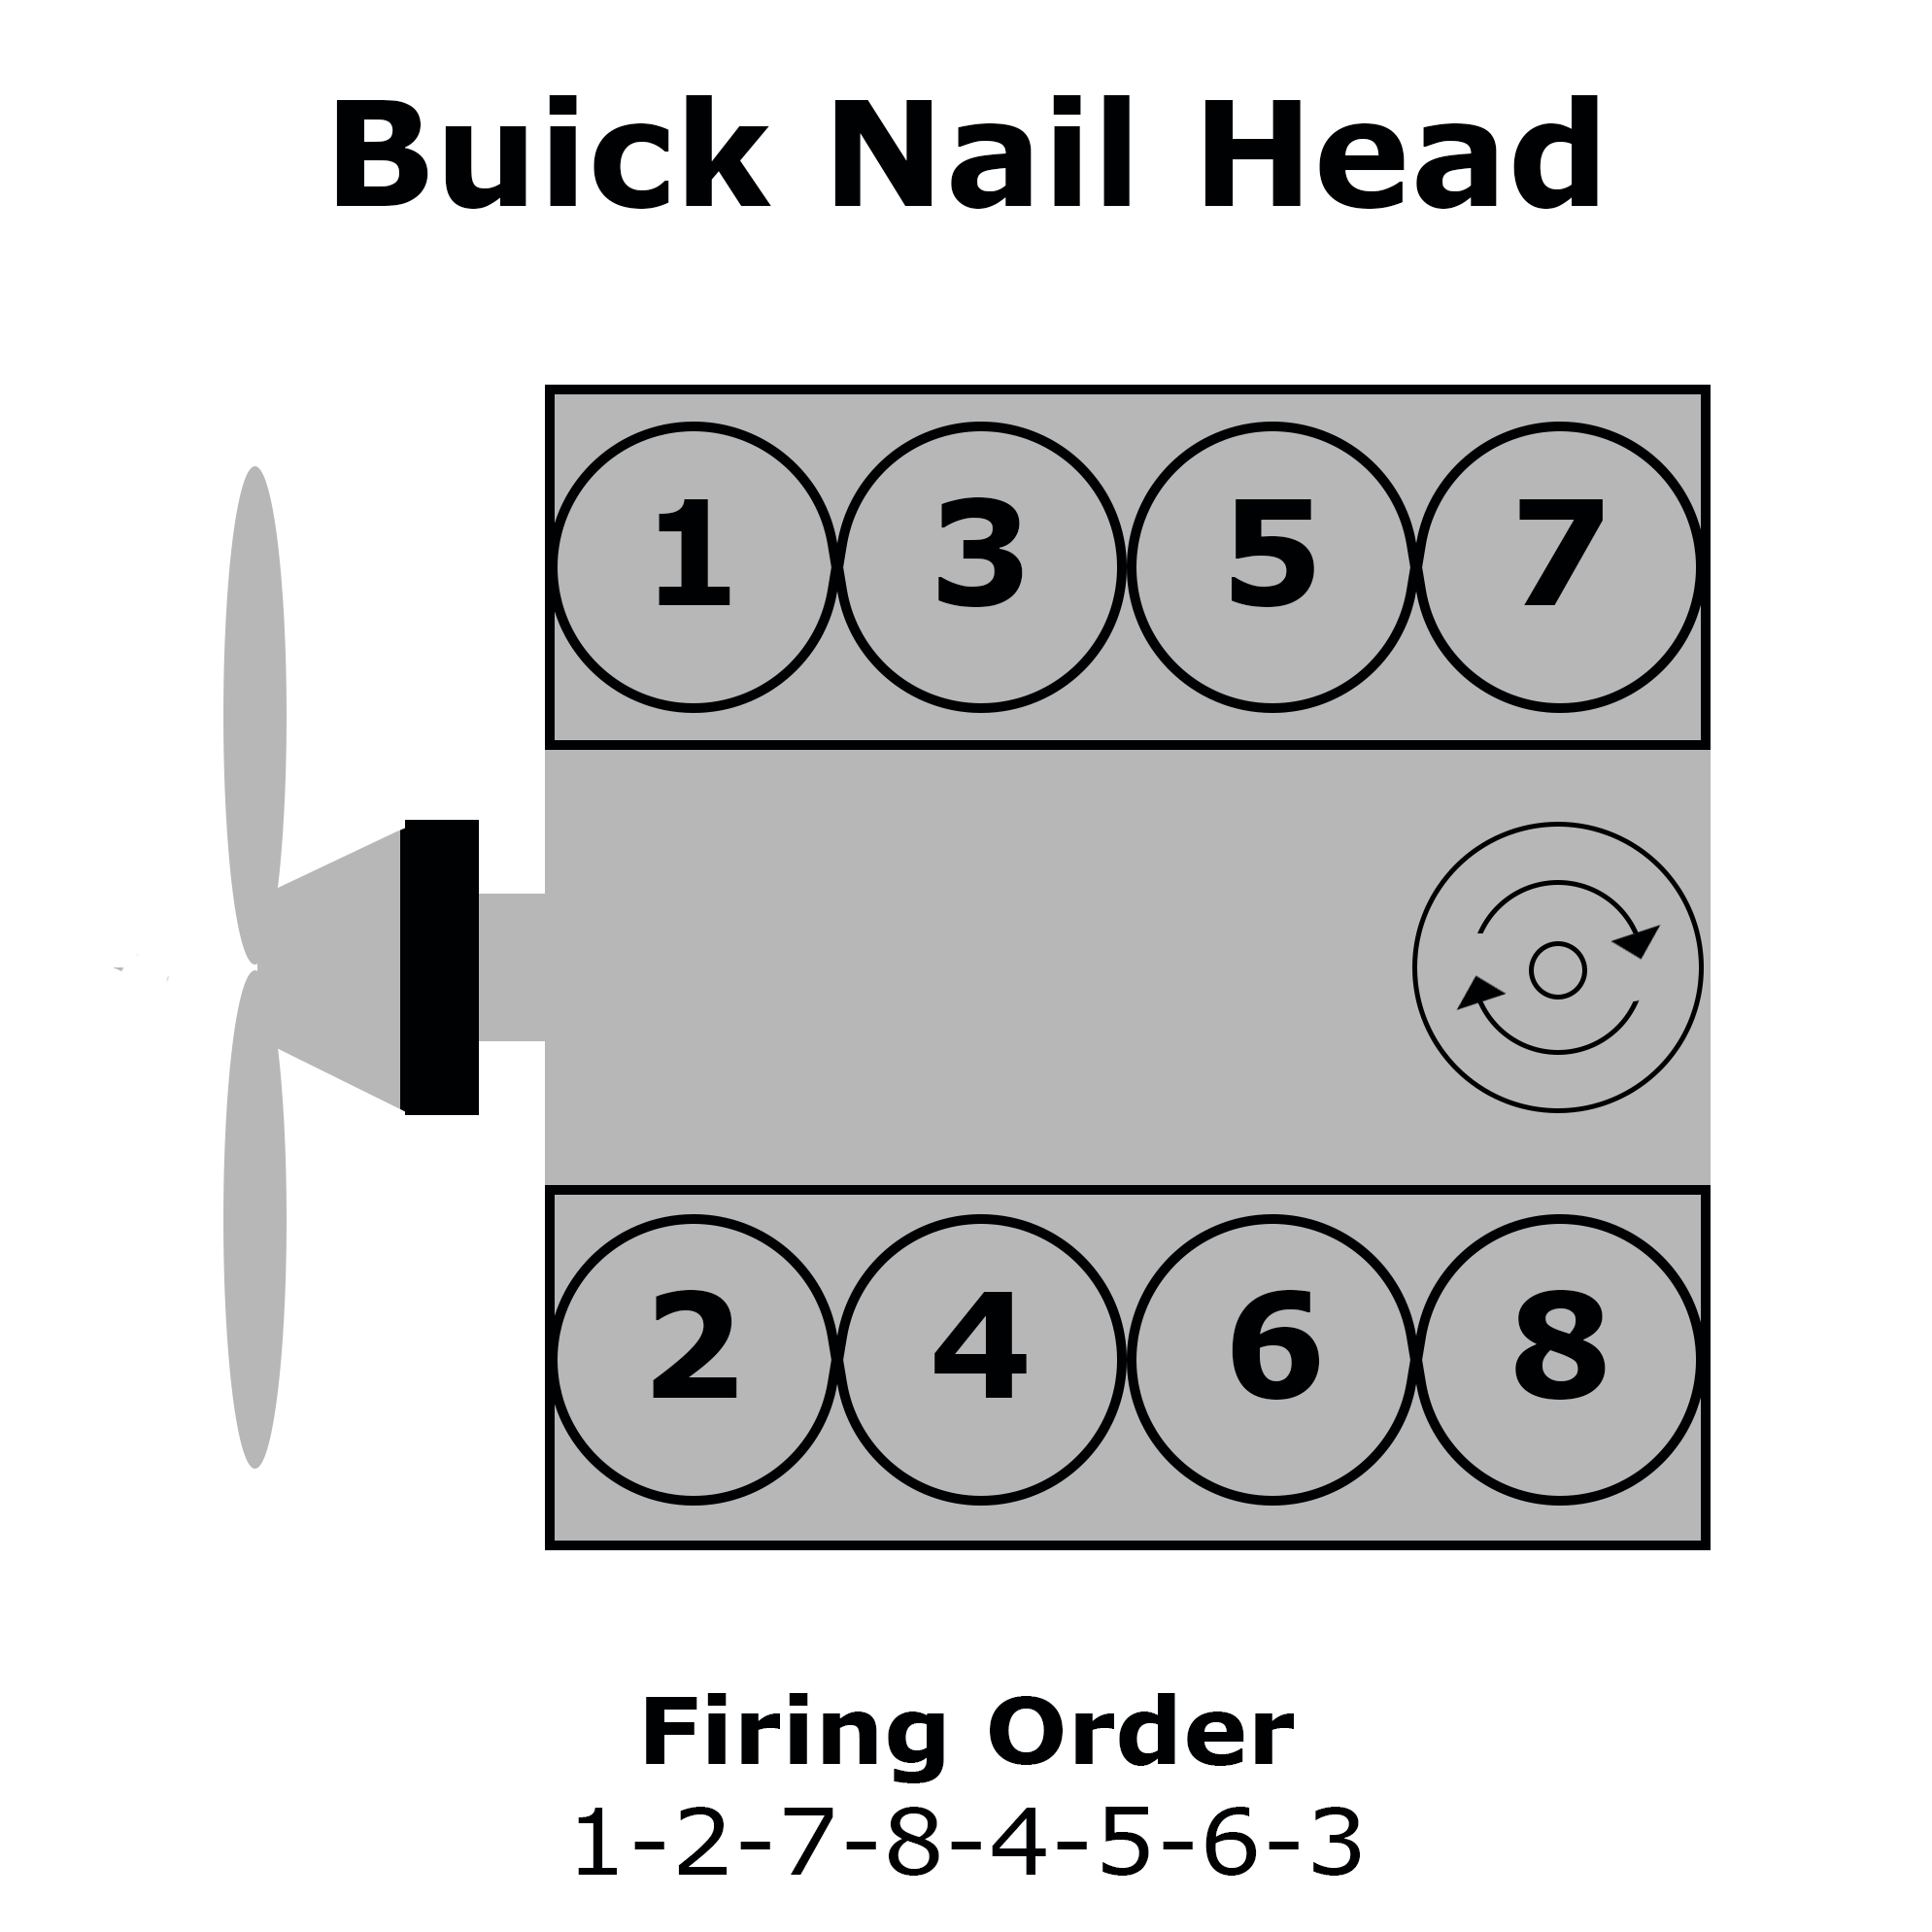 Buick Nail Head Cylinder Numbering, Distributor Rotation, and Firing Order